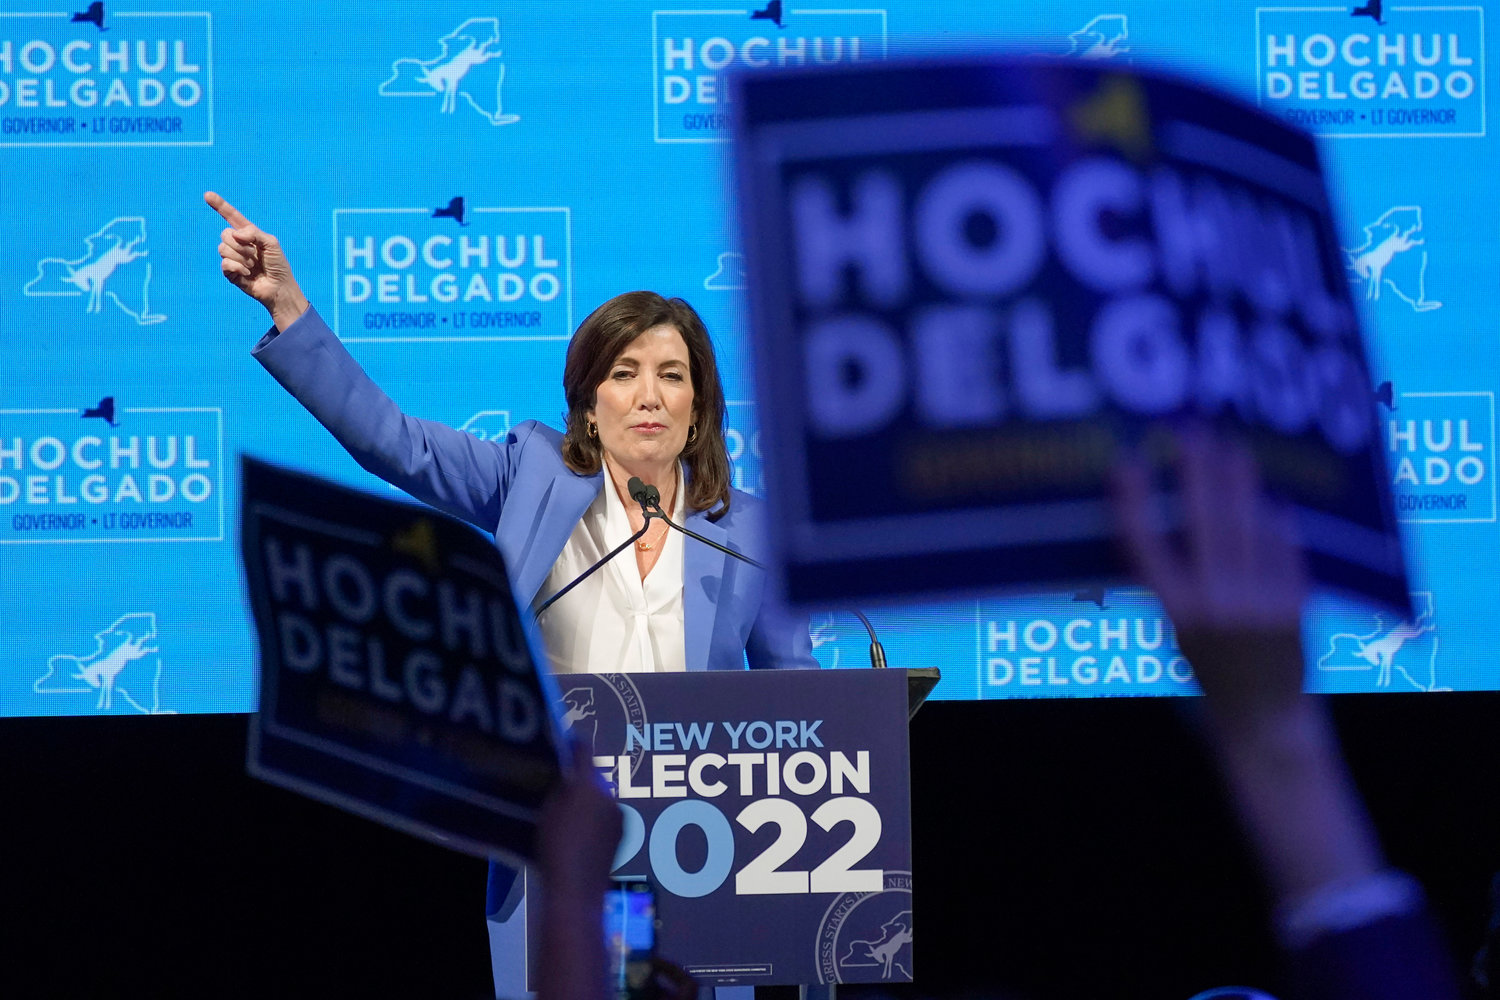 New York Gov. Kathy Hochul speaks to supporters during her election night party, Tuesday, Nov. 8, 2022, in New York. (AP Photo/Mary Altaffer)